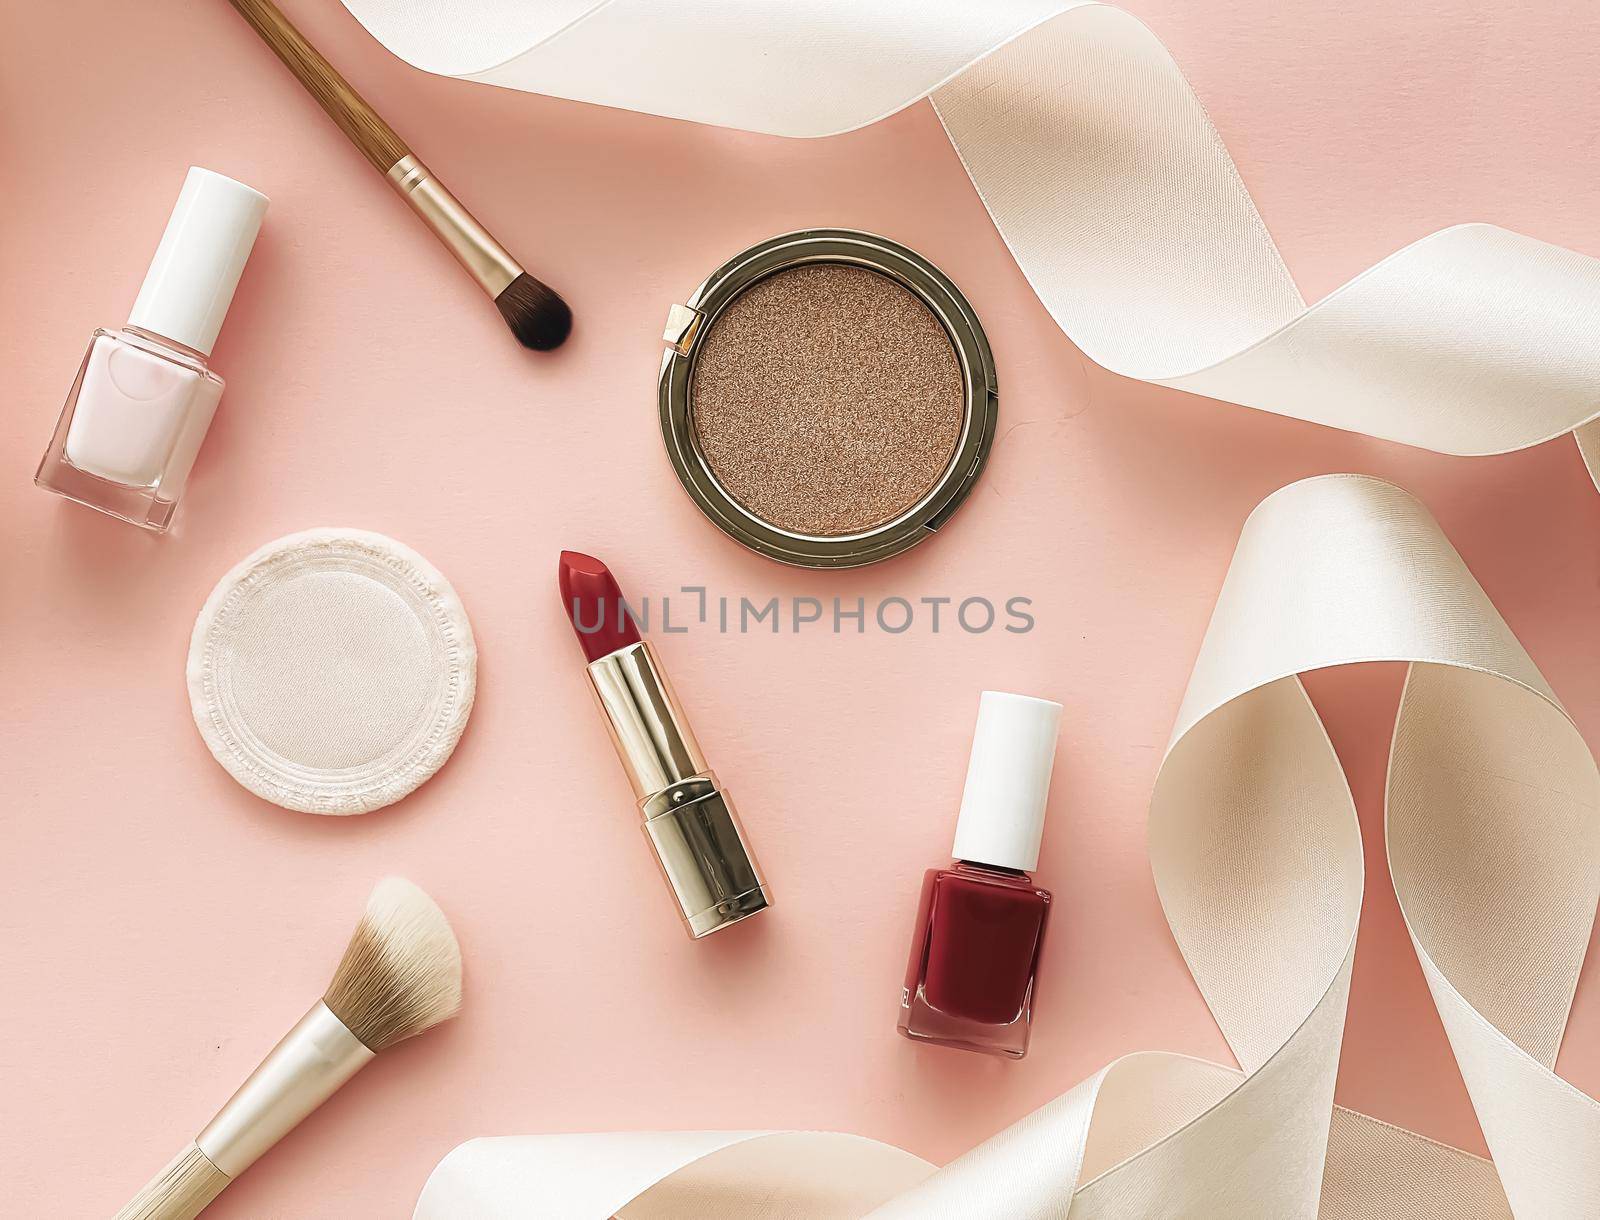 Beauty, make-up and cosmetics flatlay design with copyspace, cosmetic products and makeup tools on peach background, girly and feminine style by Anneleven